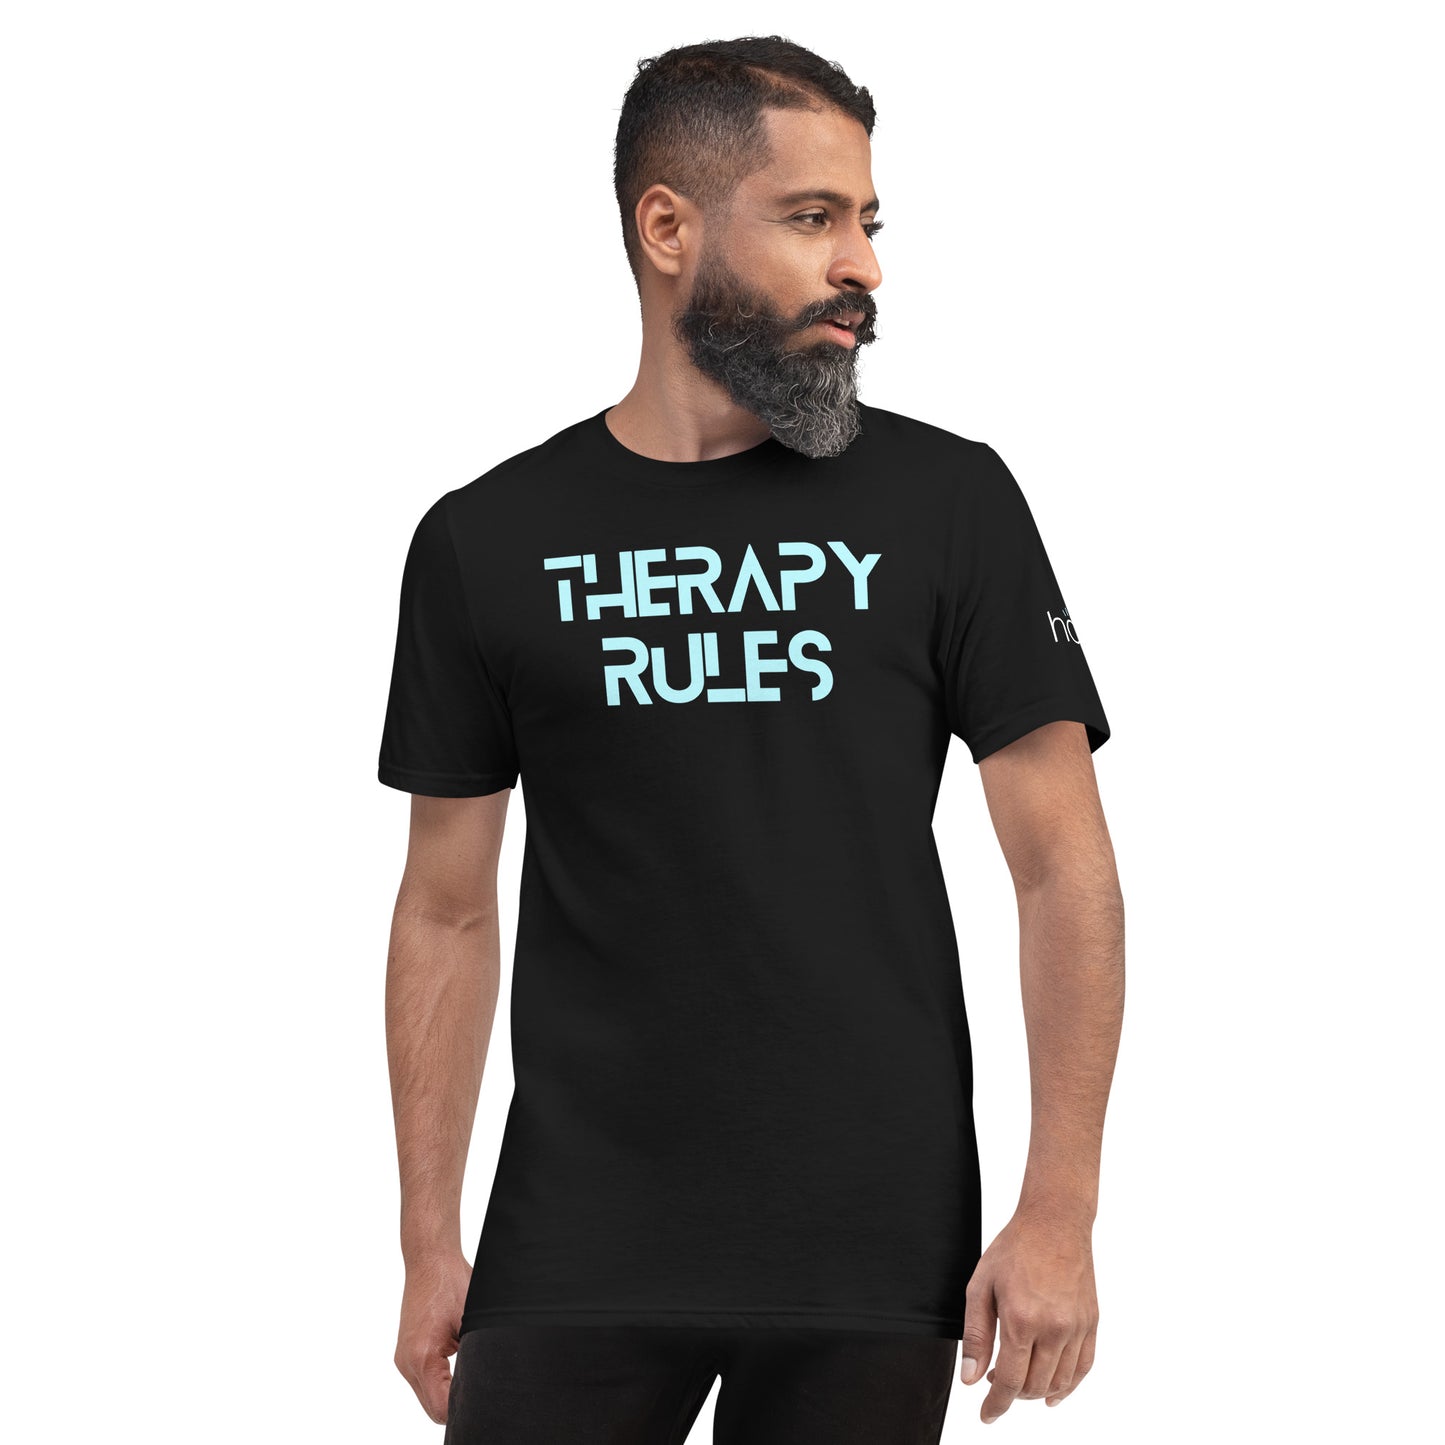 Unisex Short-Sleeve T-Shirt- Therapy Rules